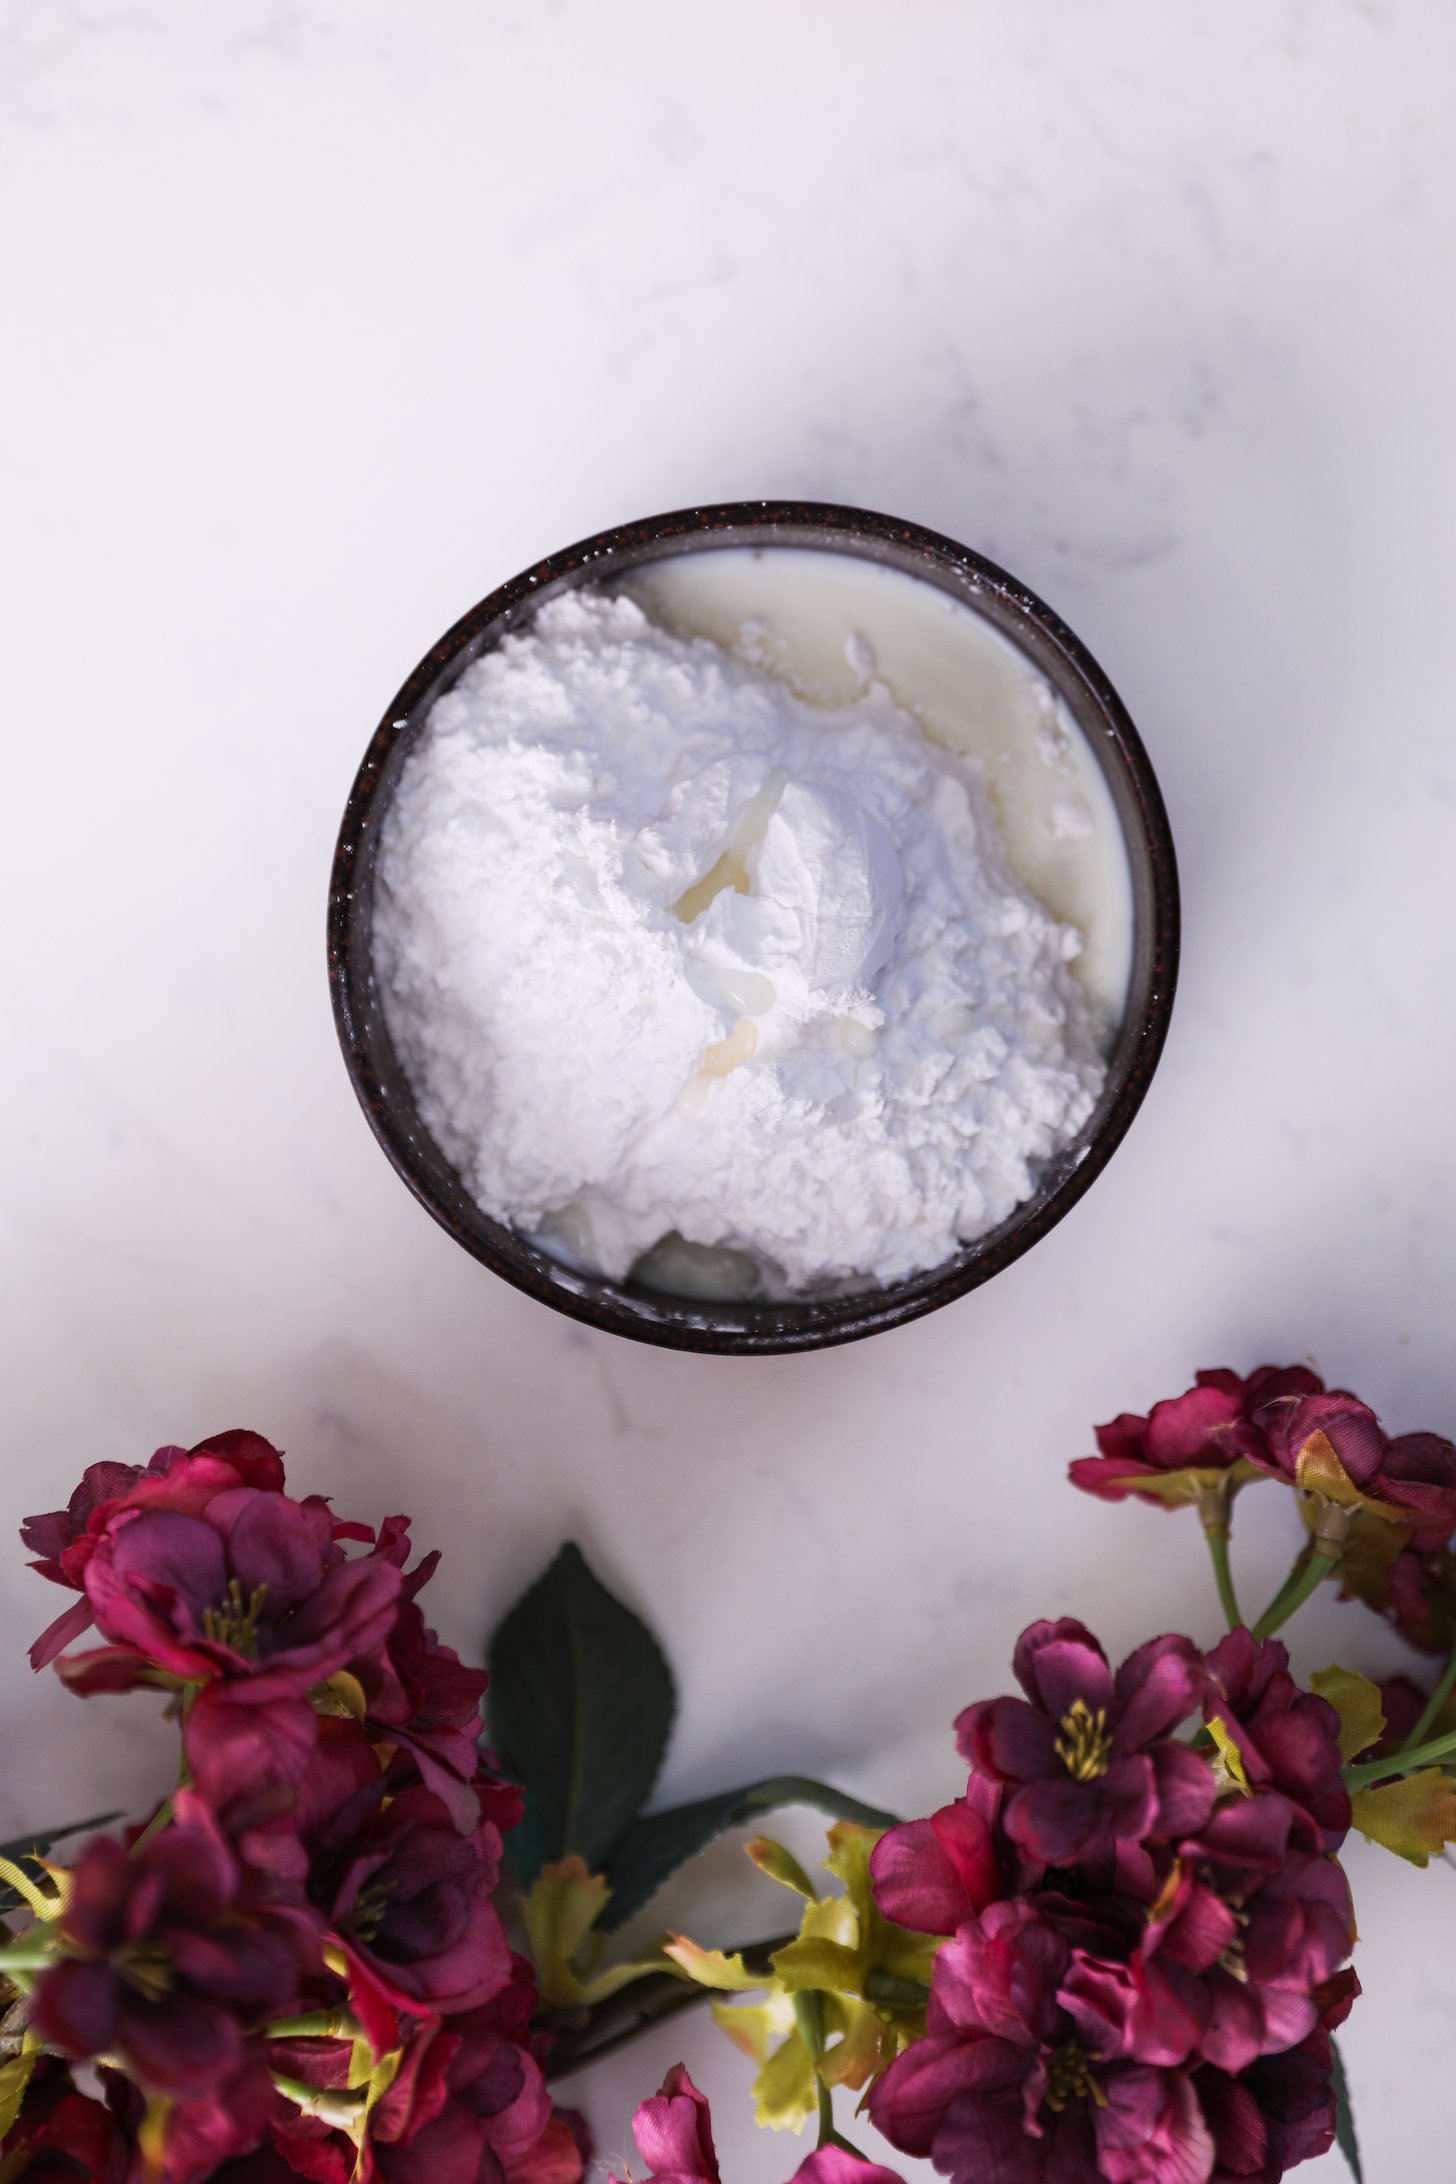 A bowl of powdered sugar with milk. There are pink flowers close by.